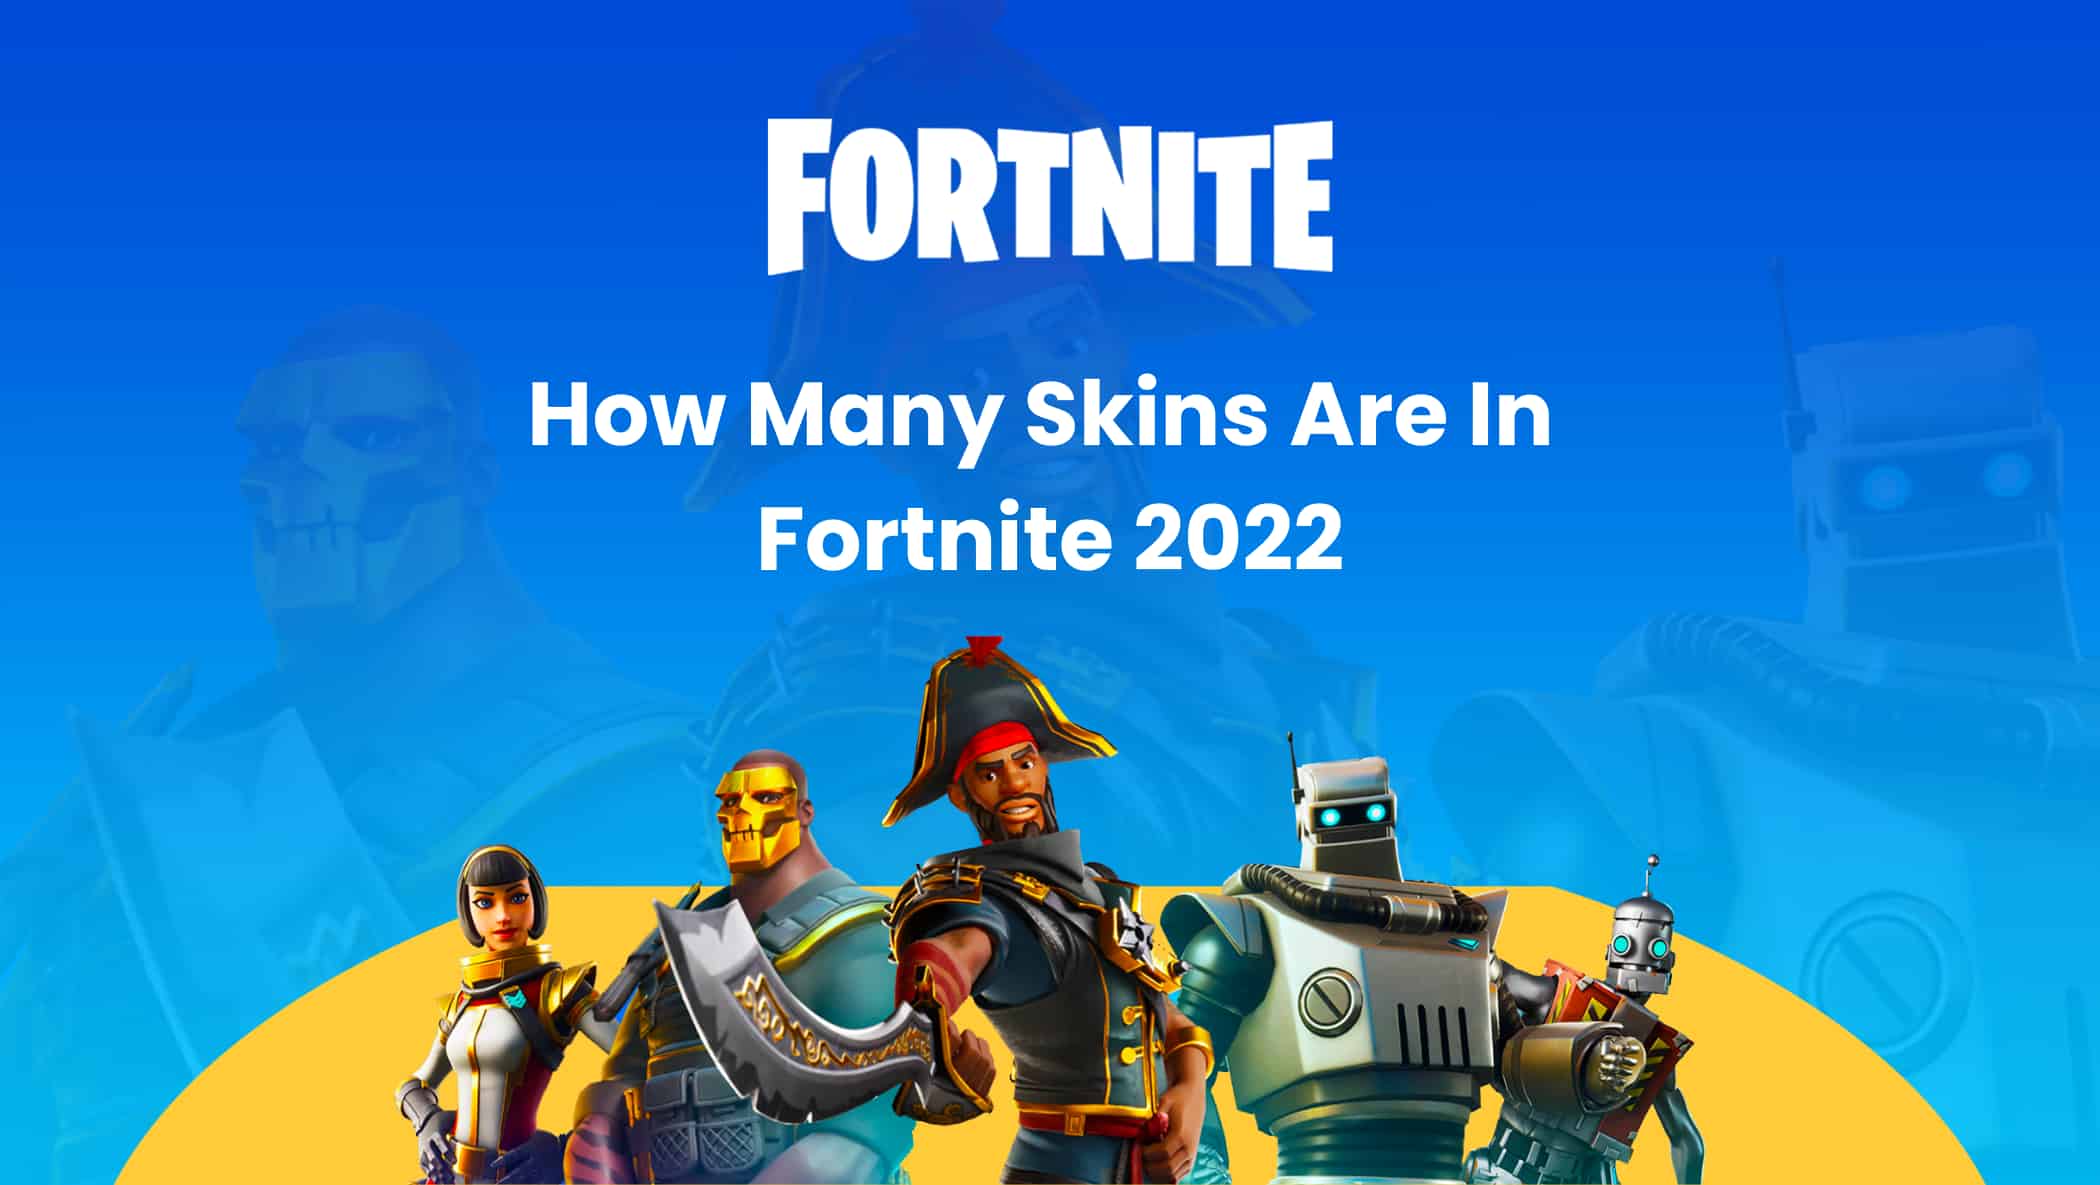 How Many Skins Are In Fortnite 2022